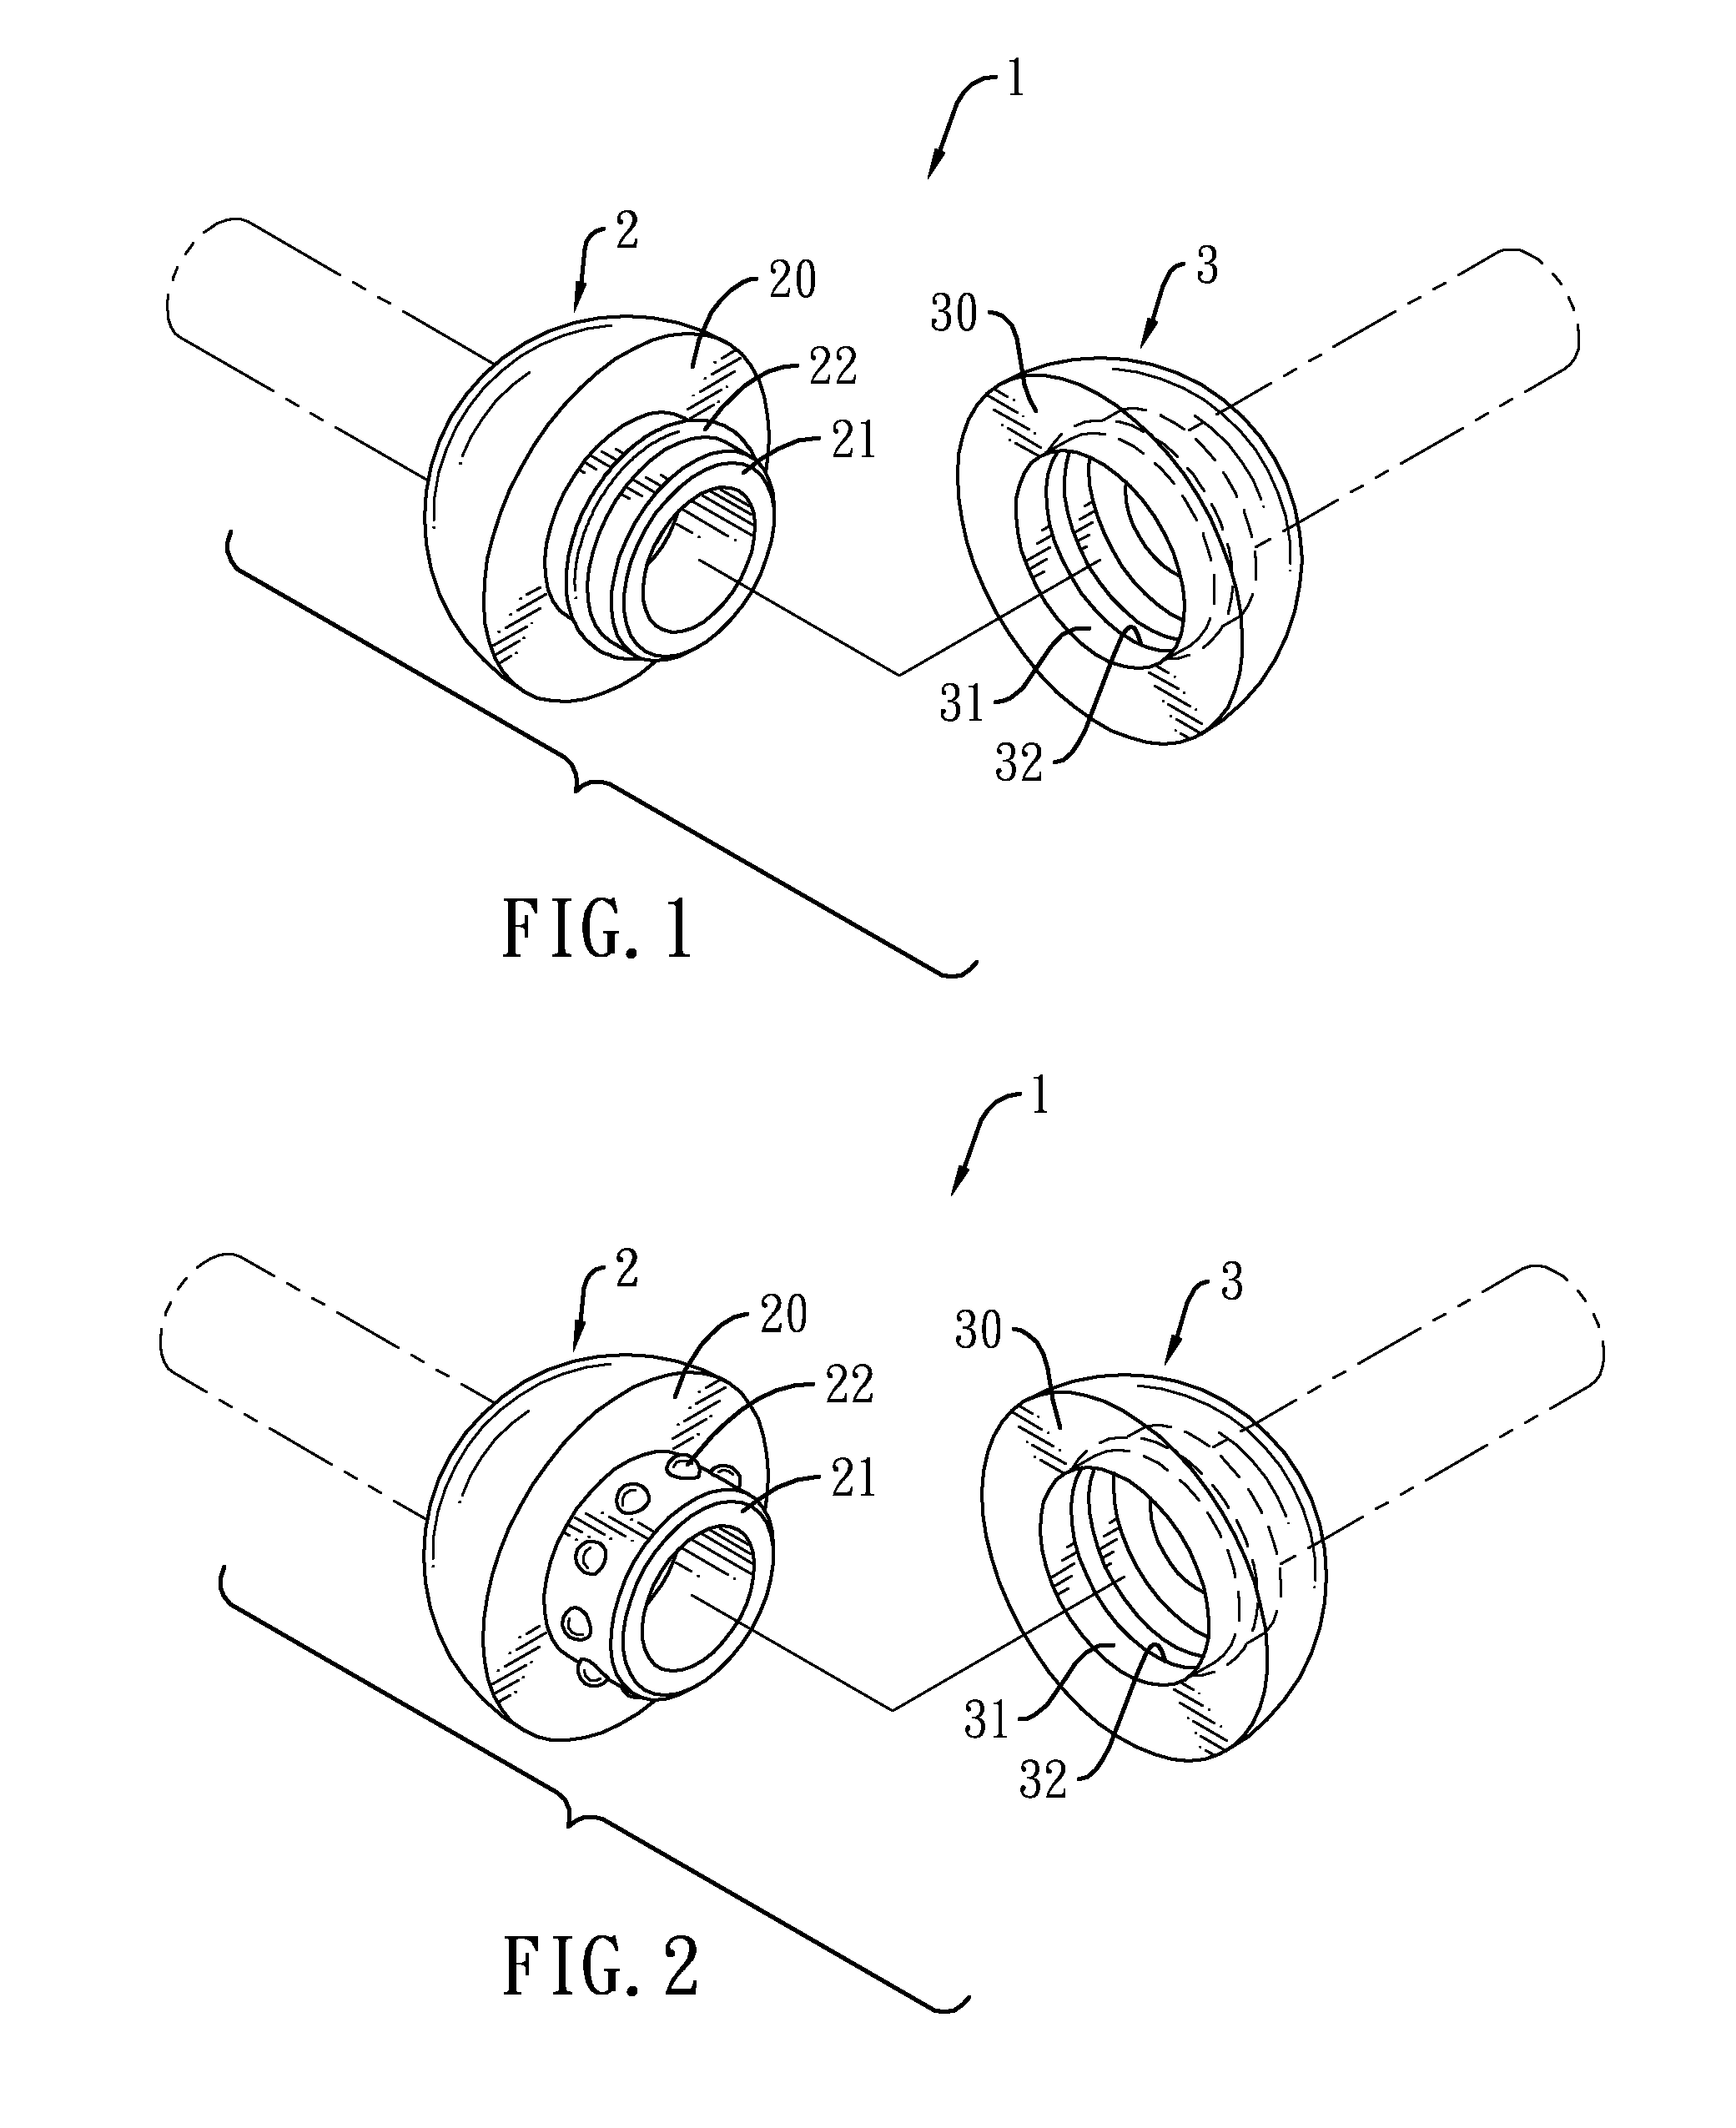 Safety connection assembly for a curtain cord